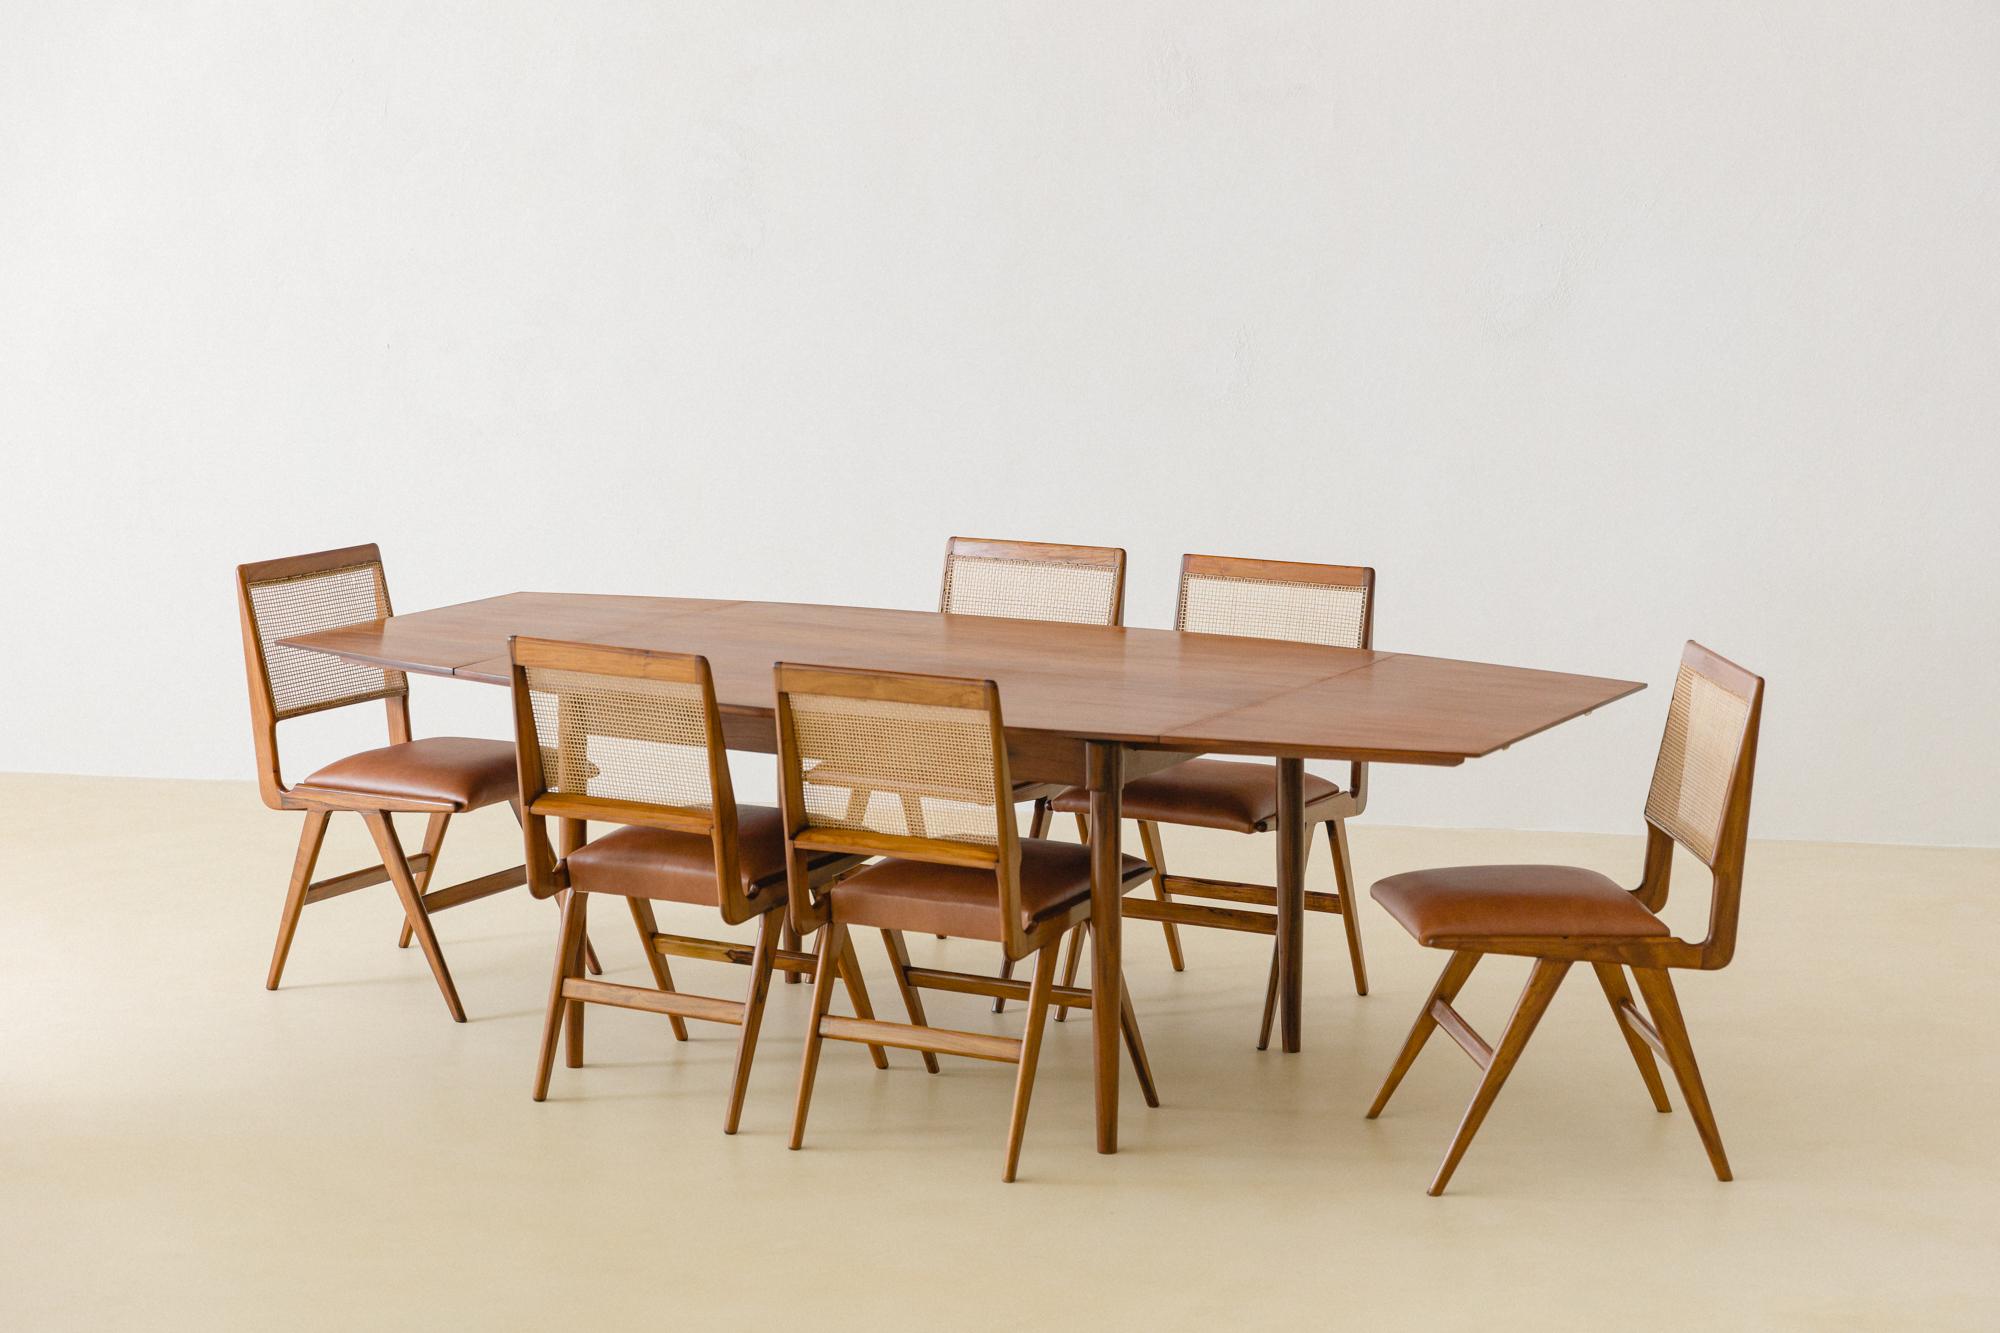 Expandable Dining Table in Caviuna by Carlo Hauner, Brazilian Midcentury, 1950s For Sale 5